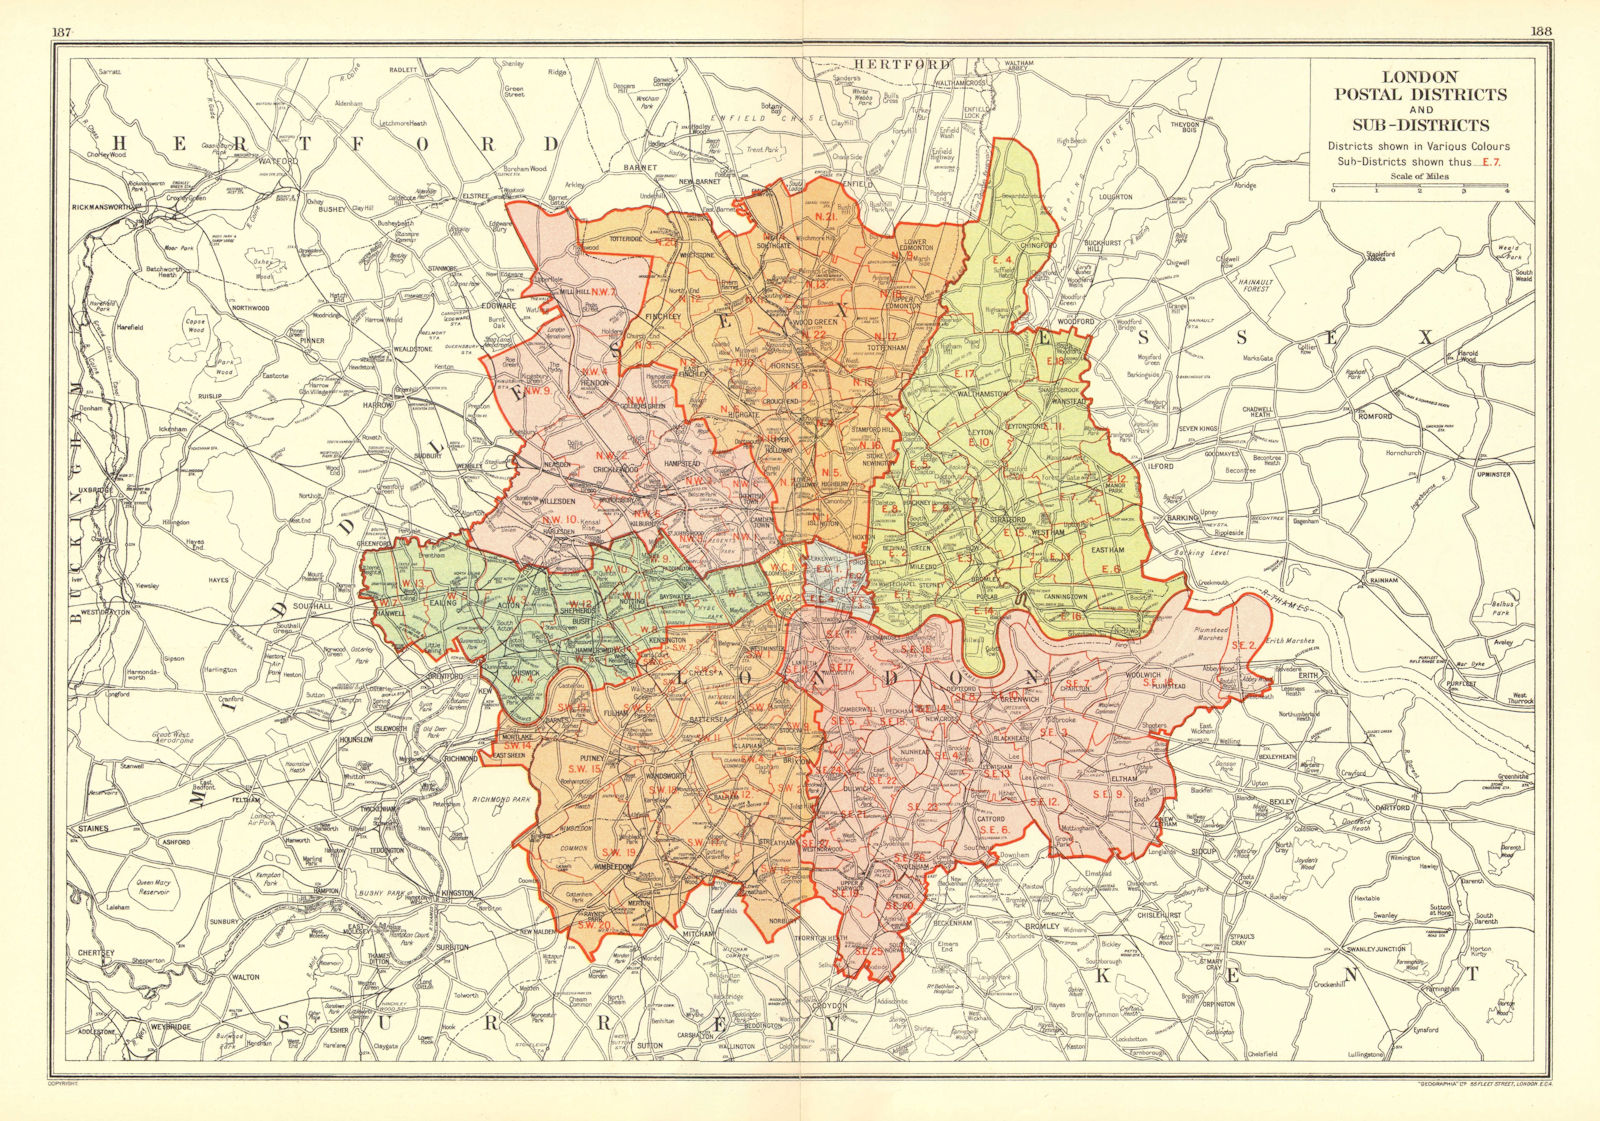 Associate Product LONDON. Postal Districts and Sub-Districts. Postcodes 1937 old vintage map